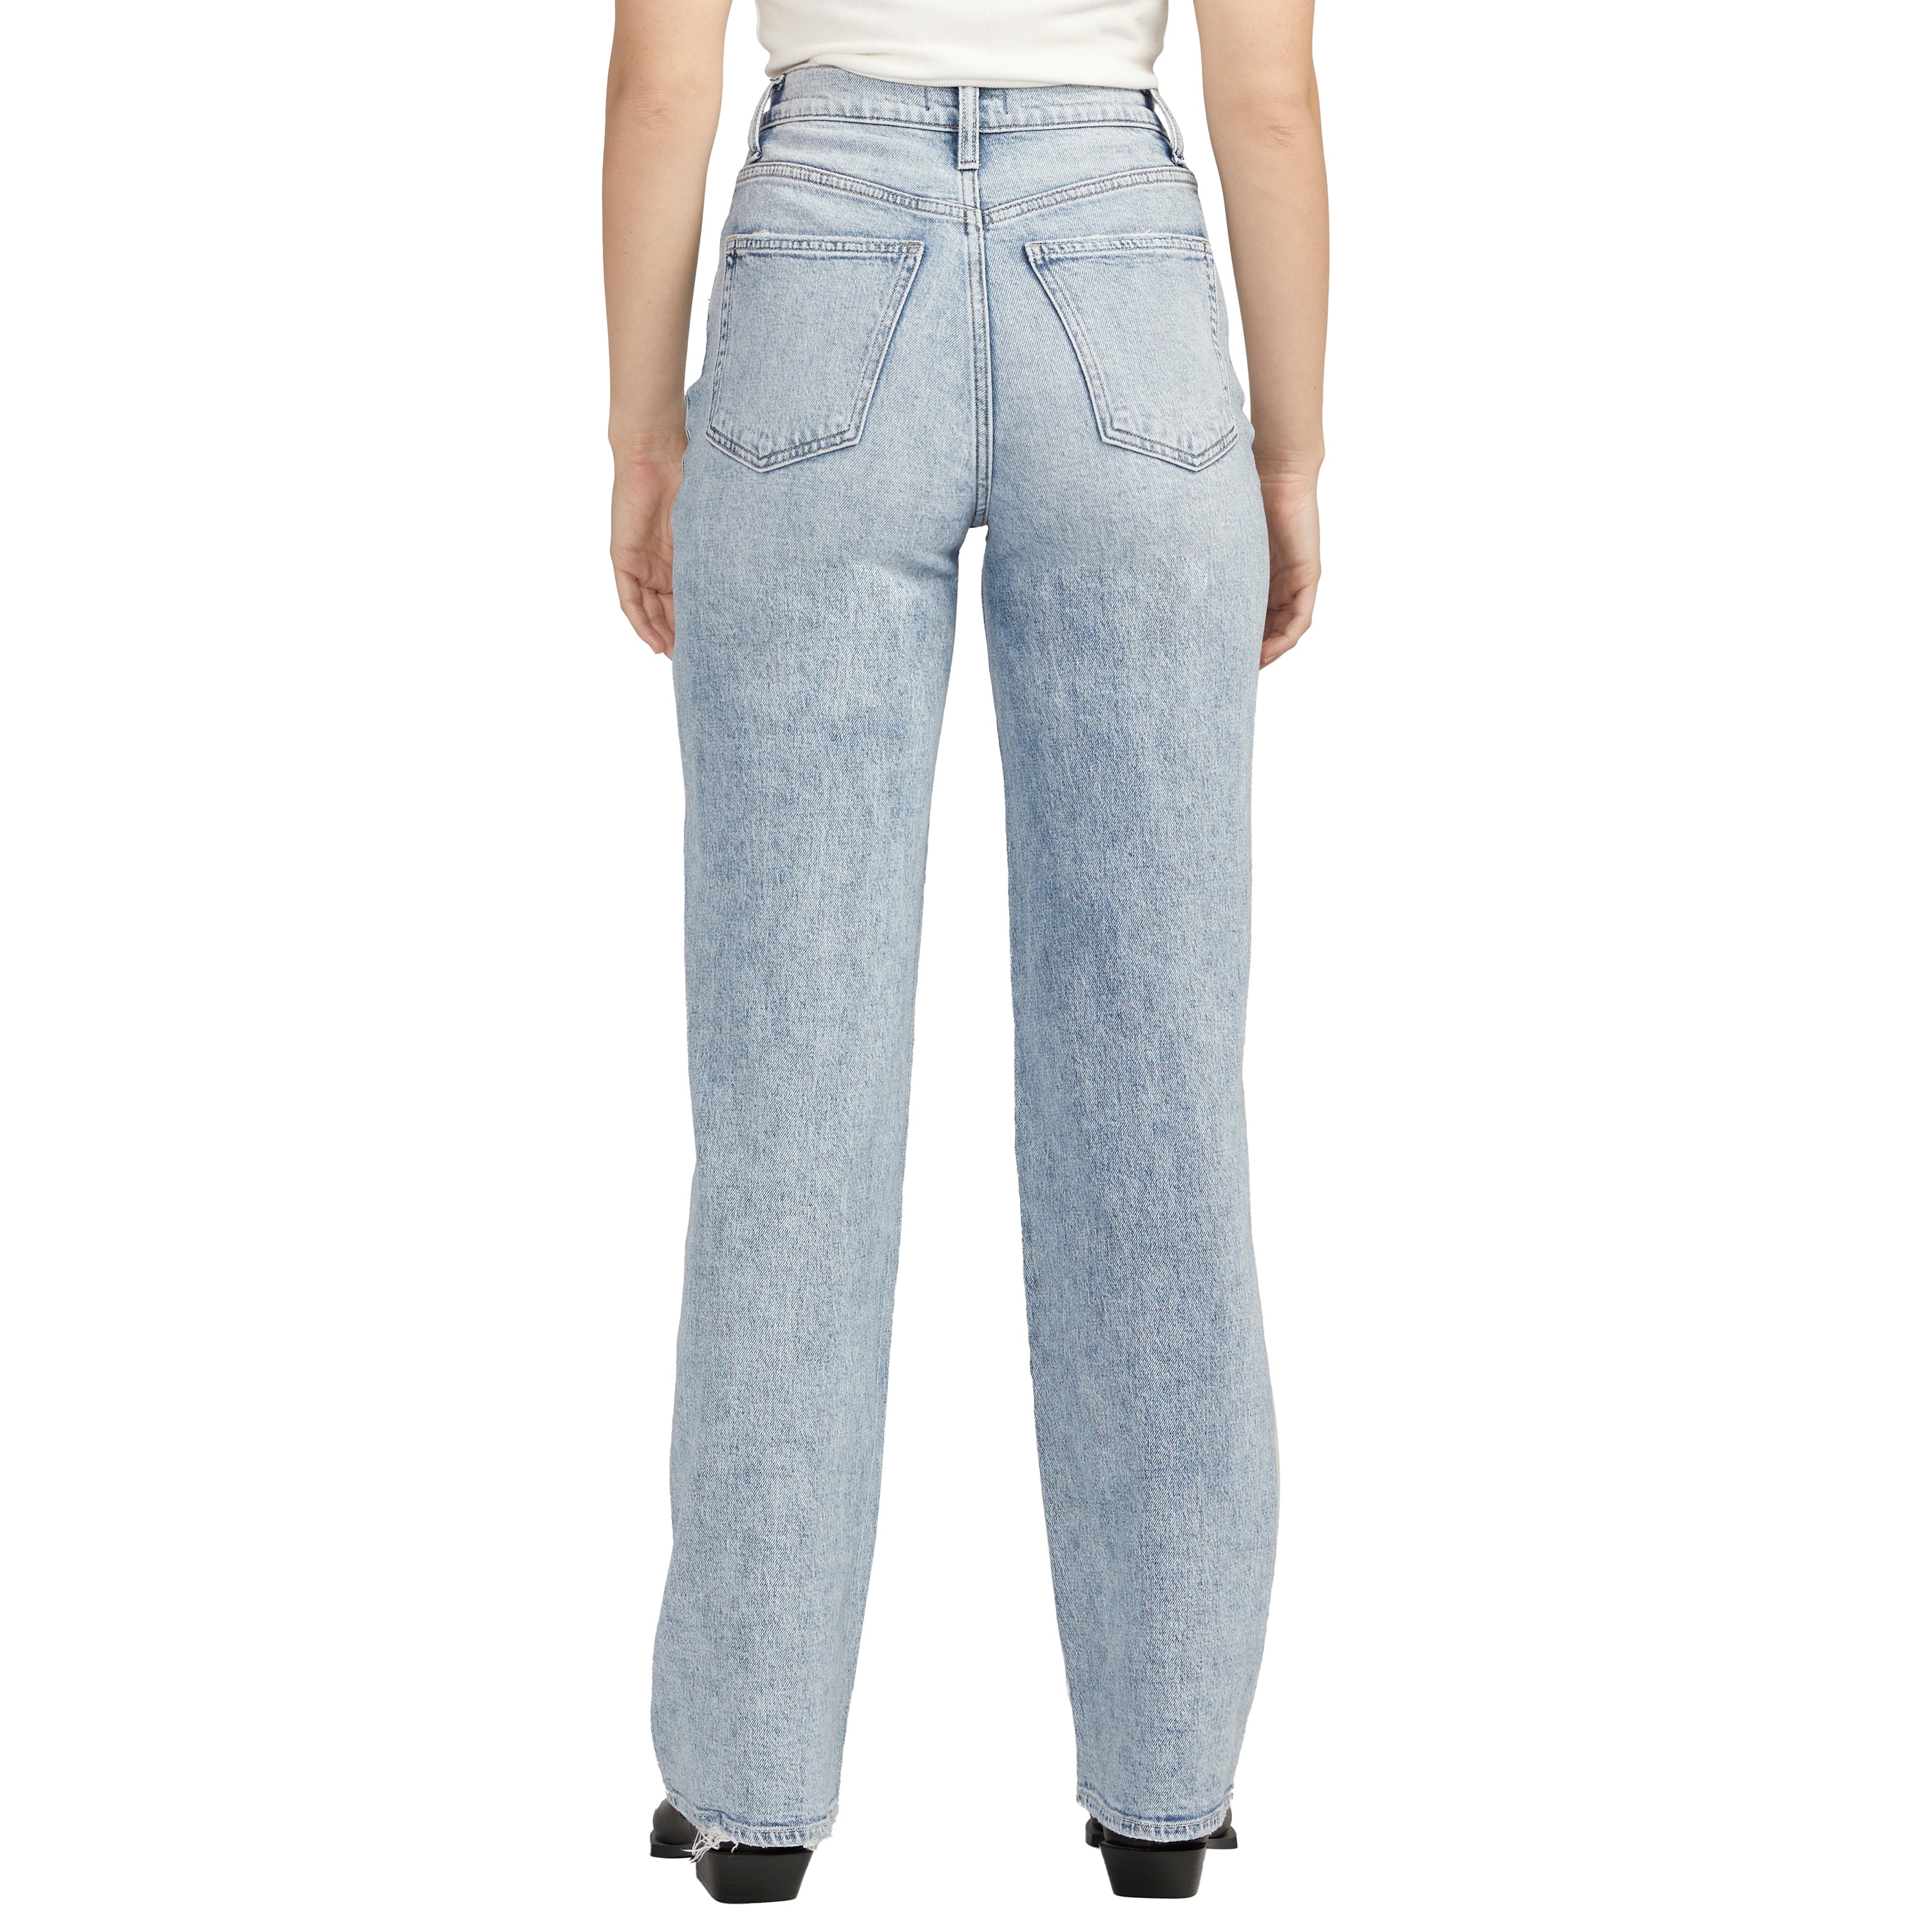 Silver Jean Highly Desirable Trouser